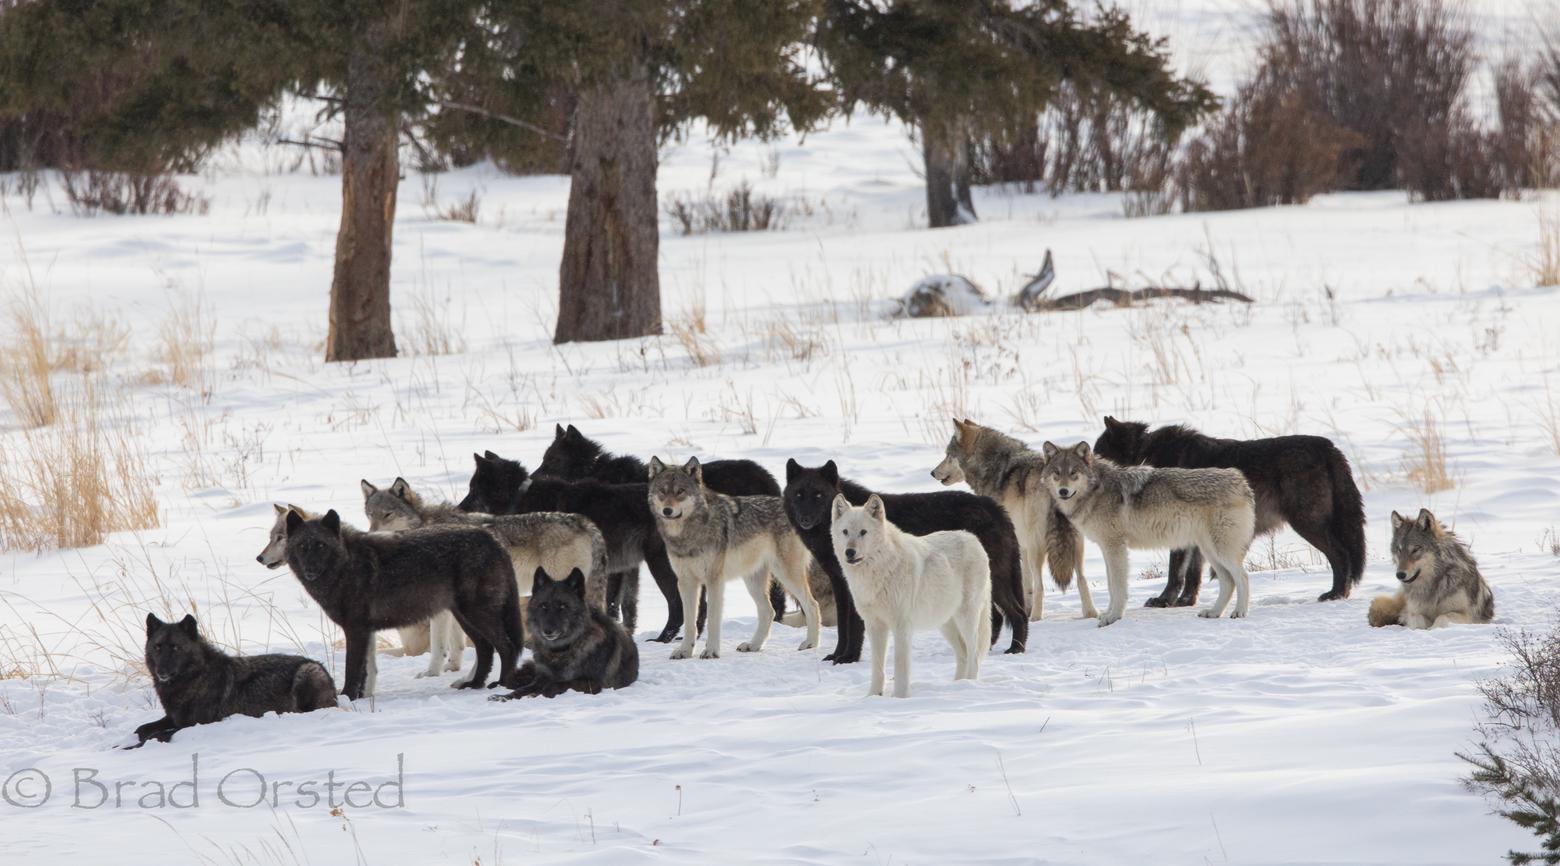 Bearing witness to the inhabitants of wild country has earned Orsted praise and a huge portfolio of images. Photo of Yellowstone wolves courtesy Brad Orsted